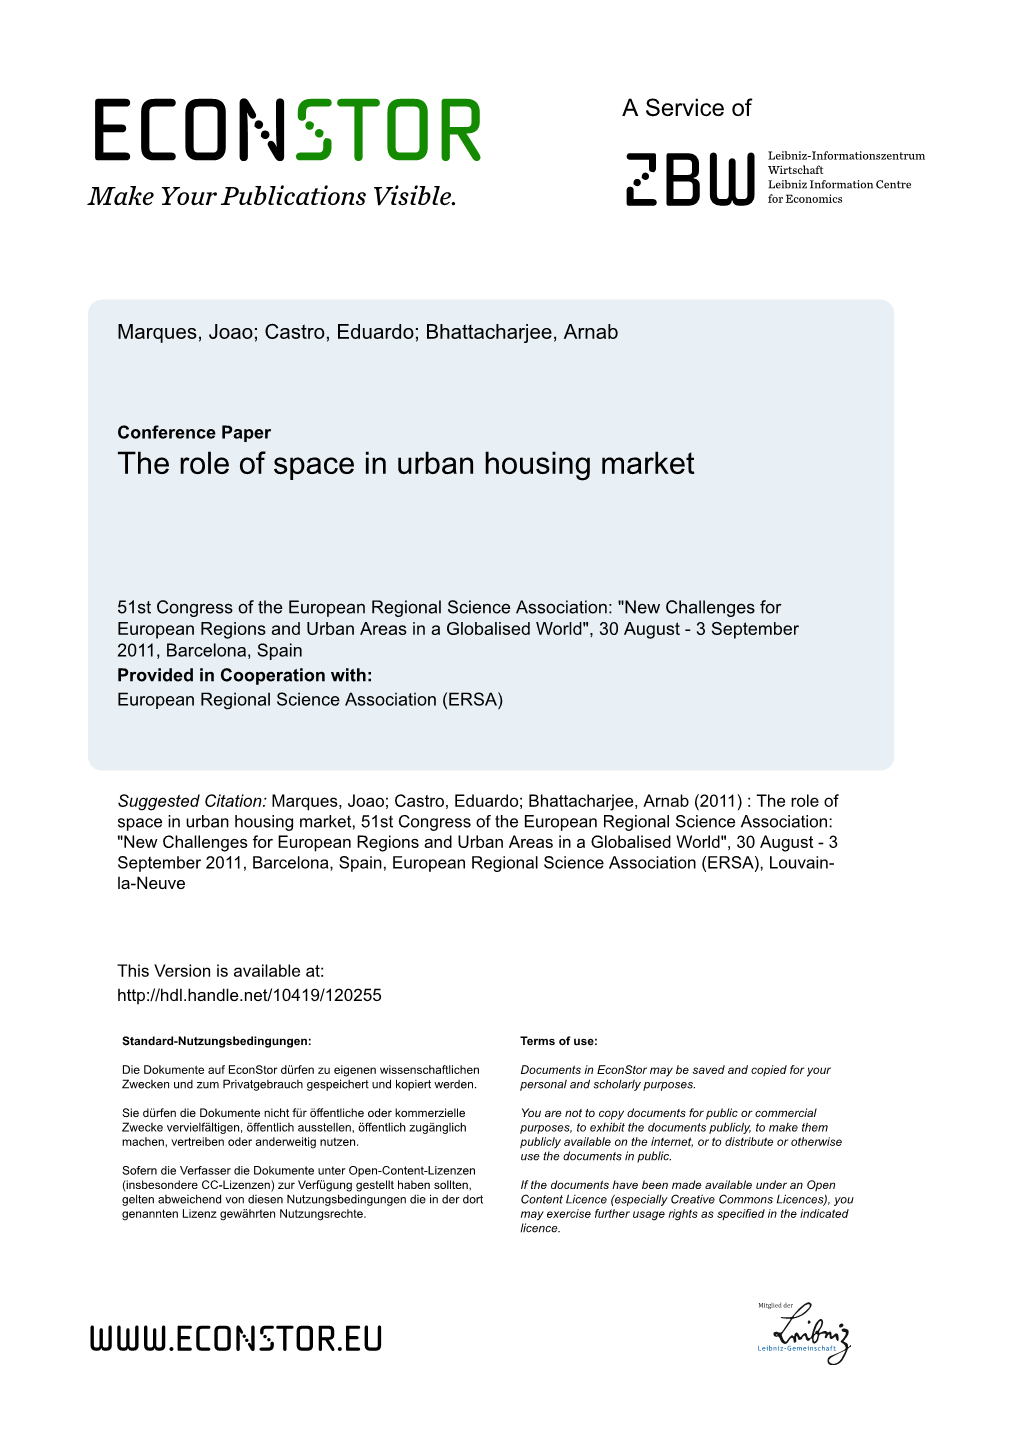 The Role of Space in Urban Housing Market